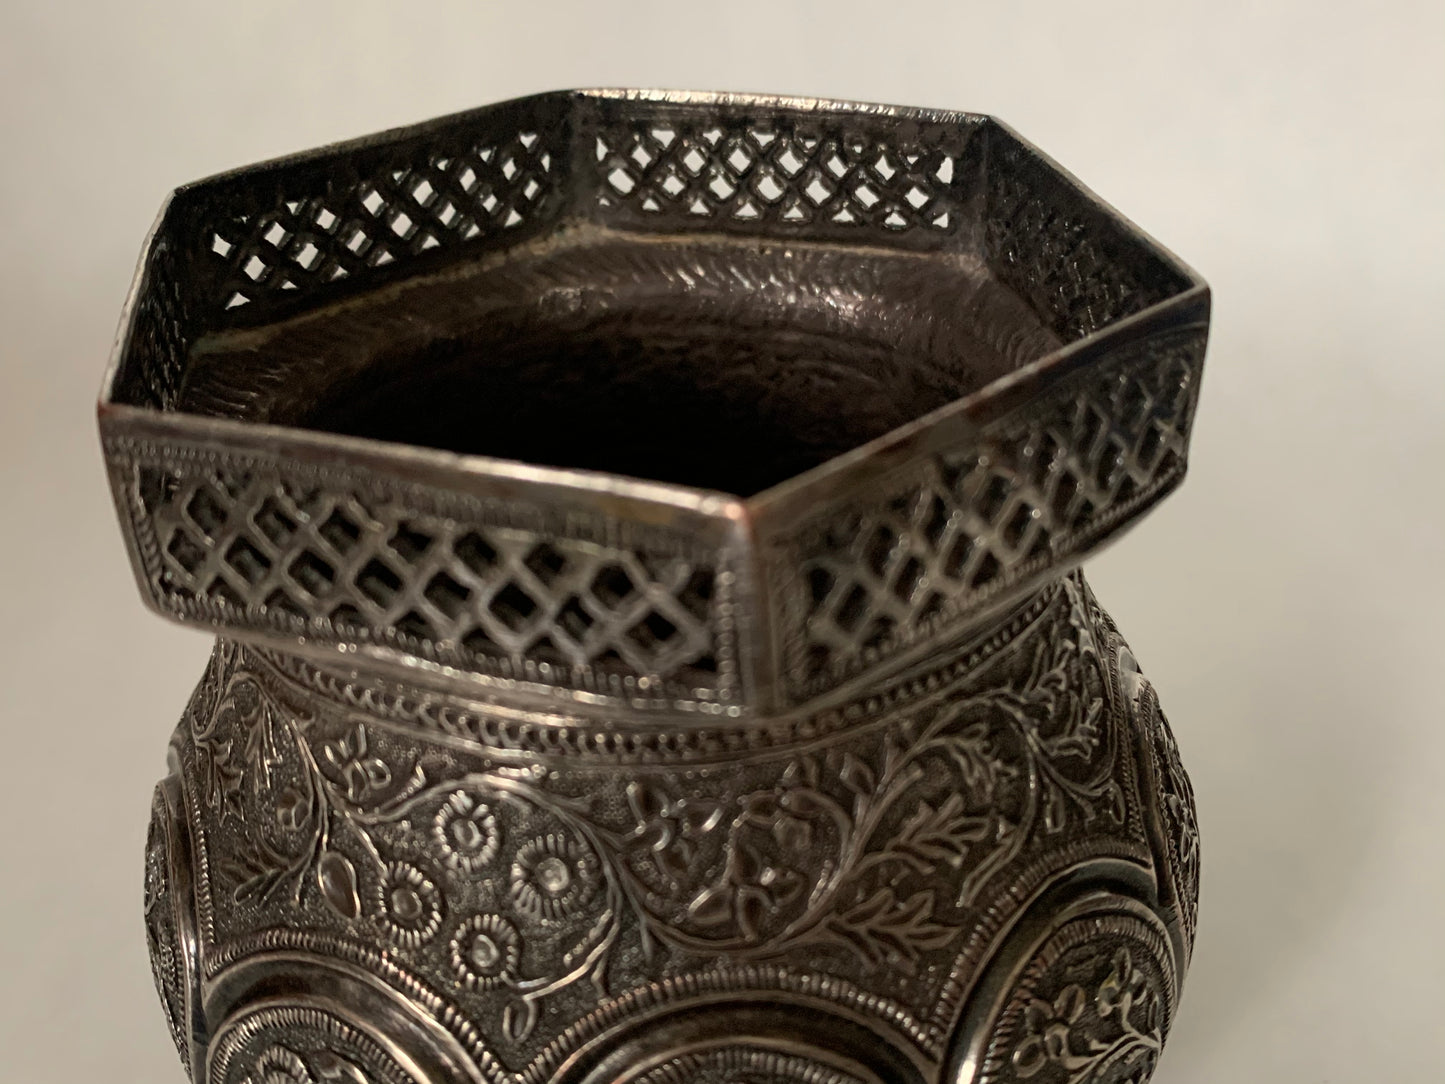 An exquisitely carved antique silver utensil -possibly a censer with floral details